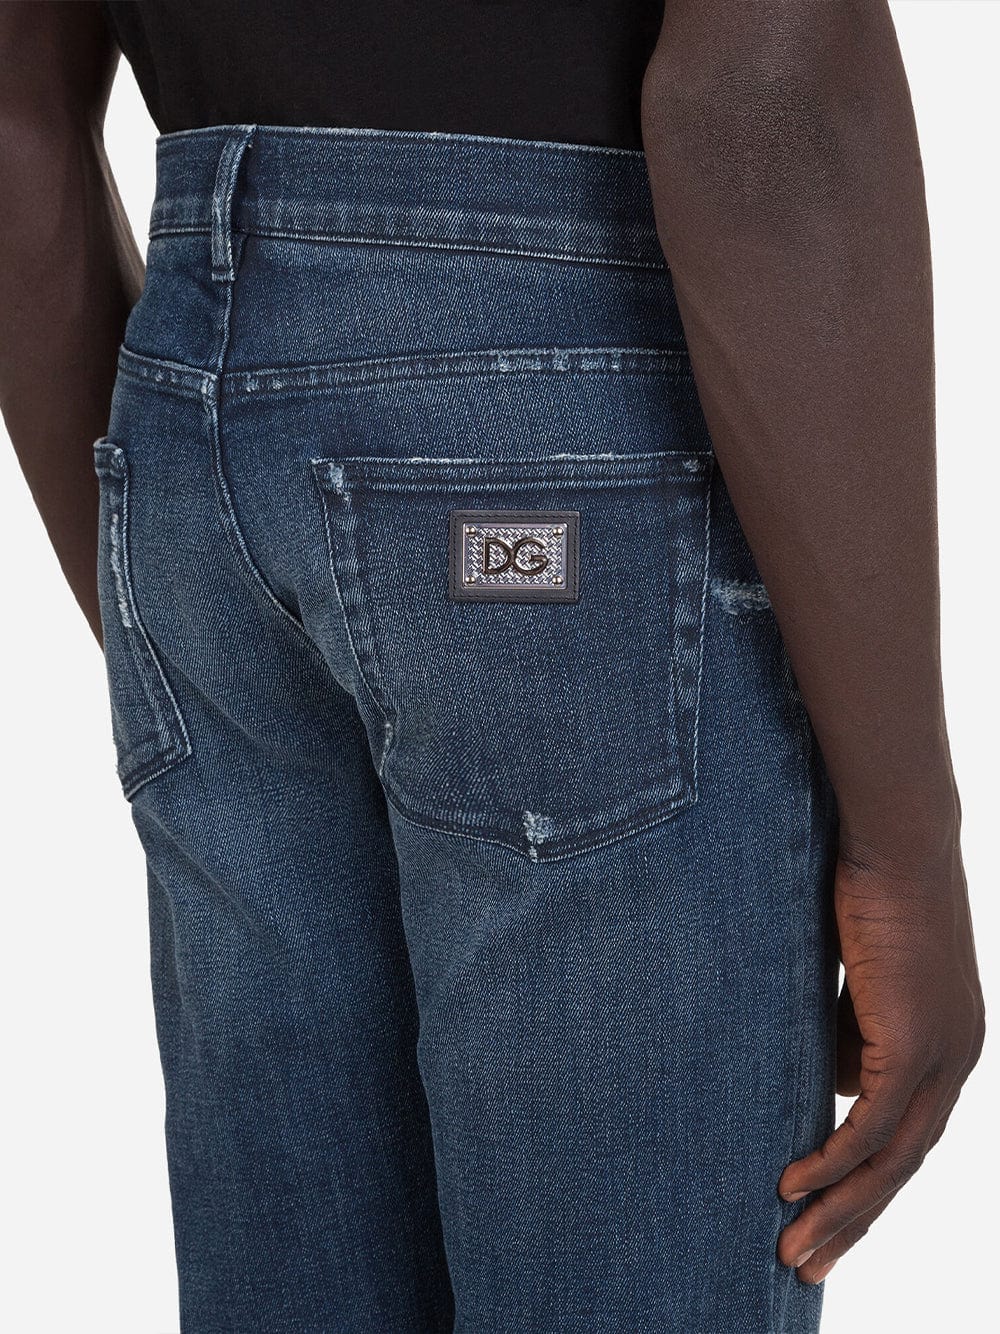 Dolce & Gabbana Slim-Fit Stretch Jeans With Rips